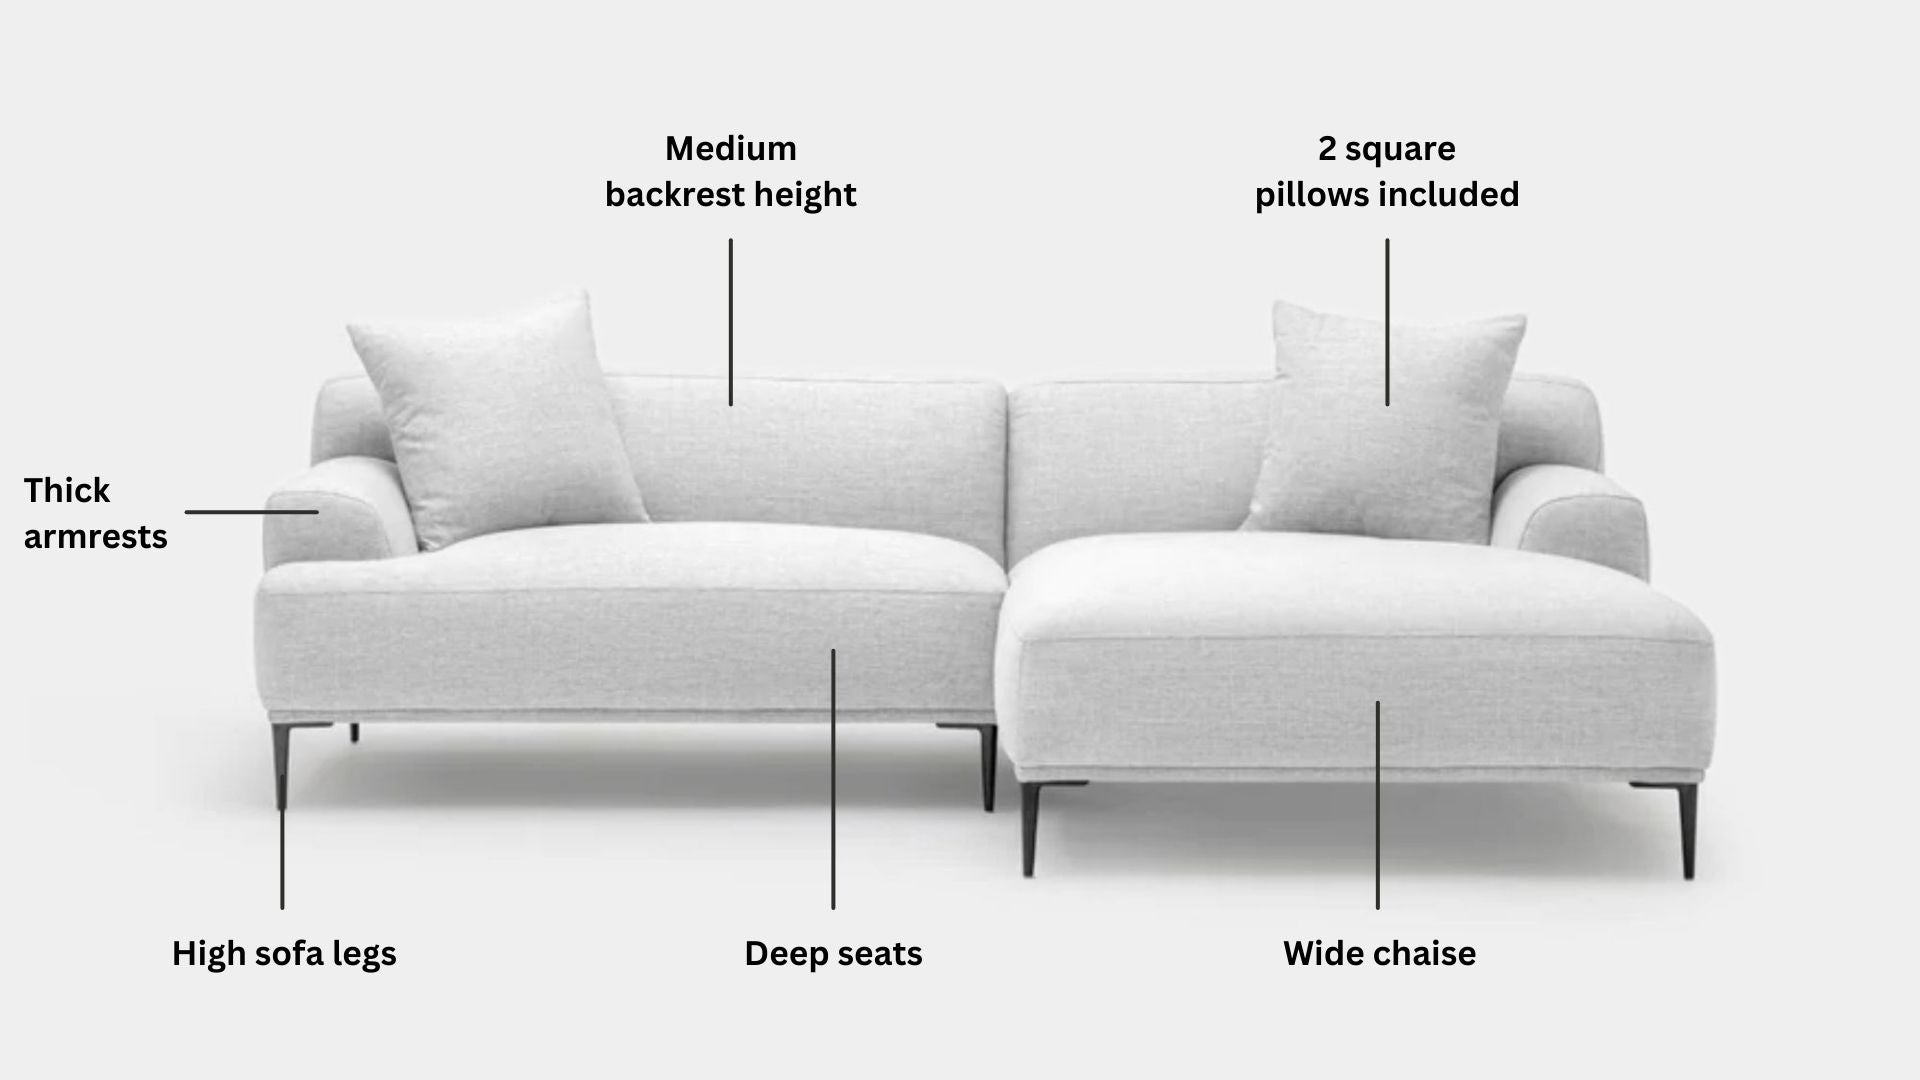 Key features such as armrest thickness, cushion height, seat depth and sofa leg height for Crystal Fabric Sectional Sofa